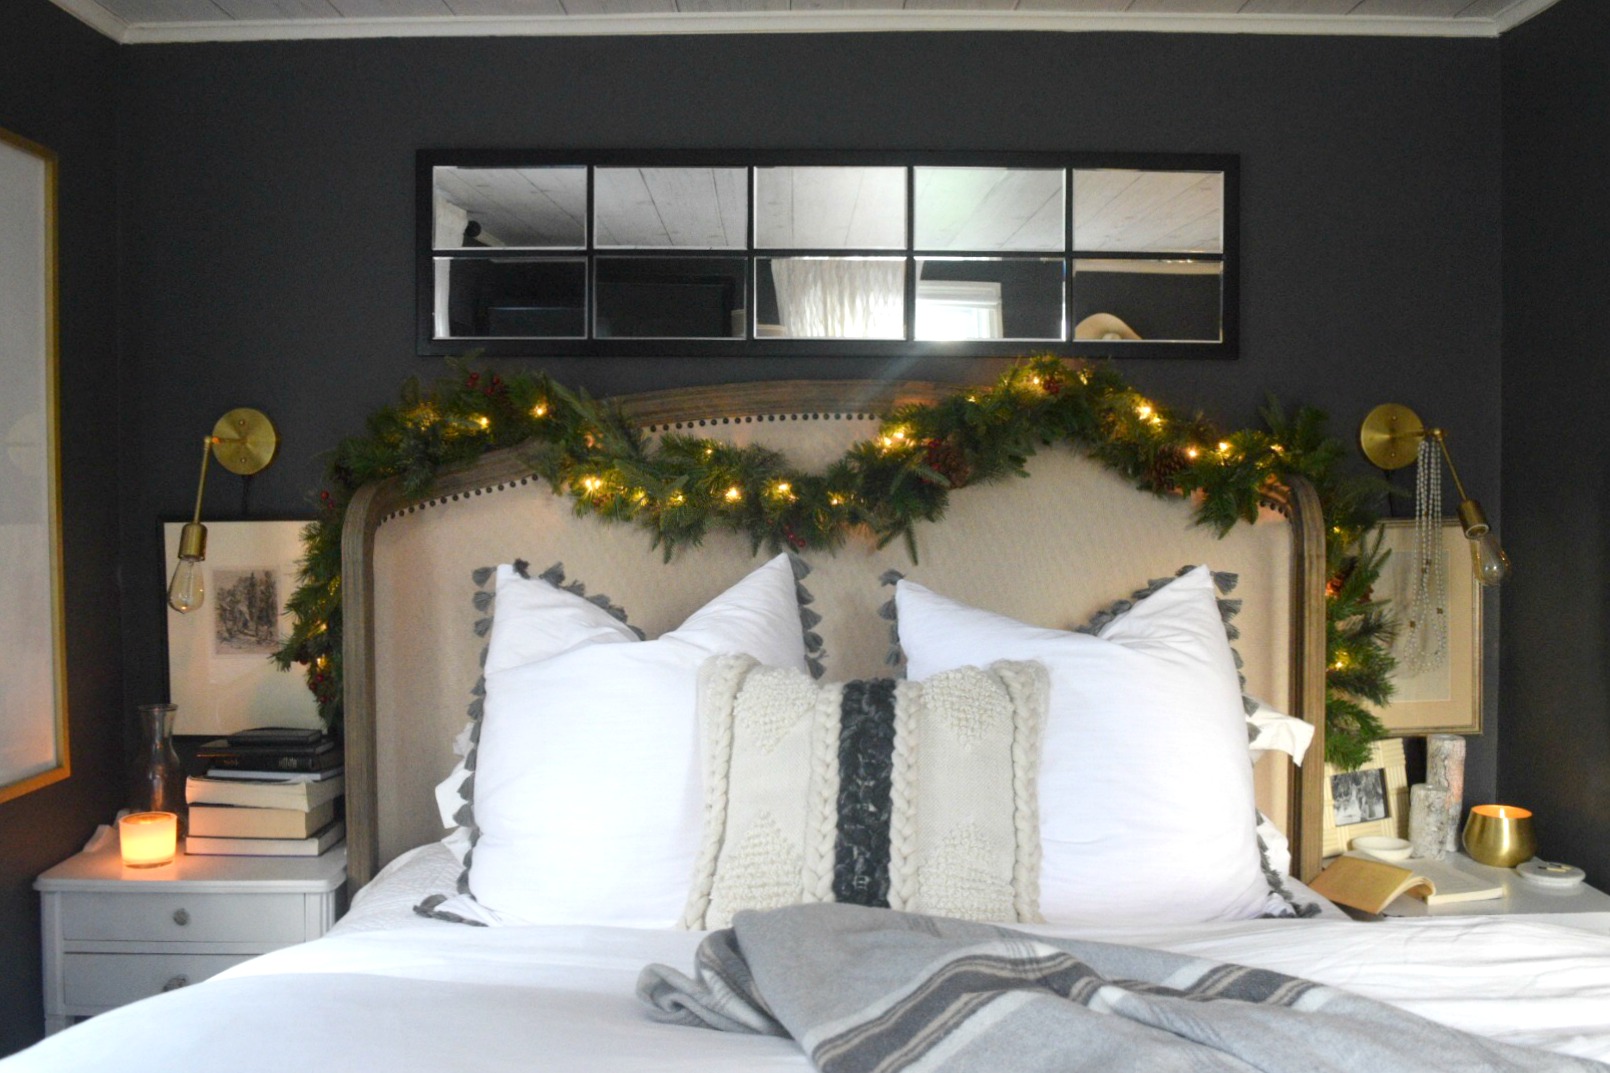 Christmas Bedroom Ideas- Simple Garland and Cozy Bedding